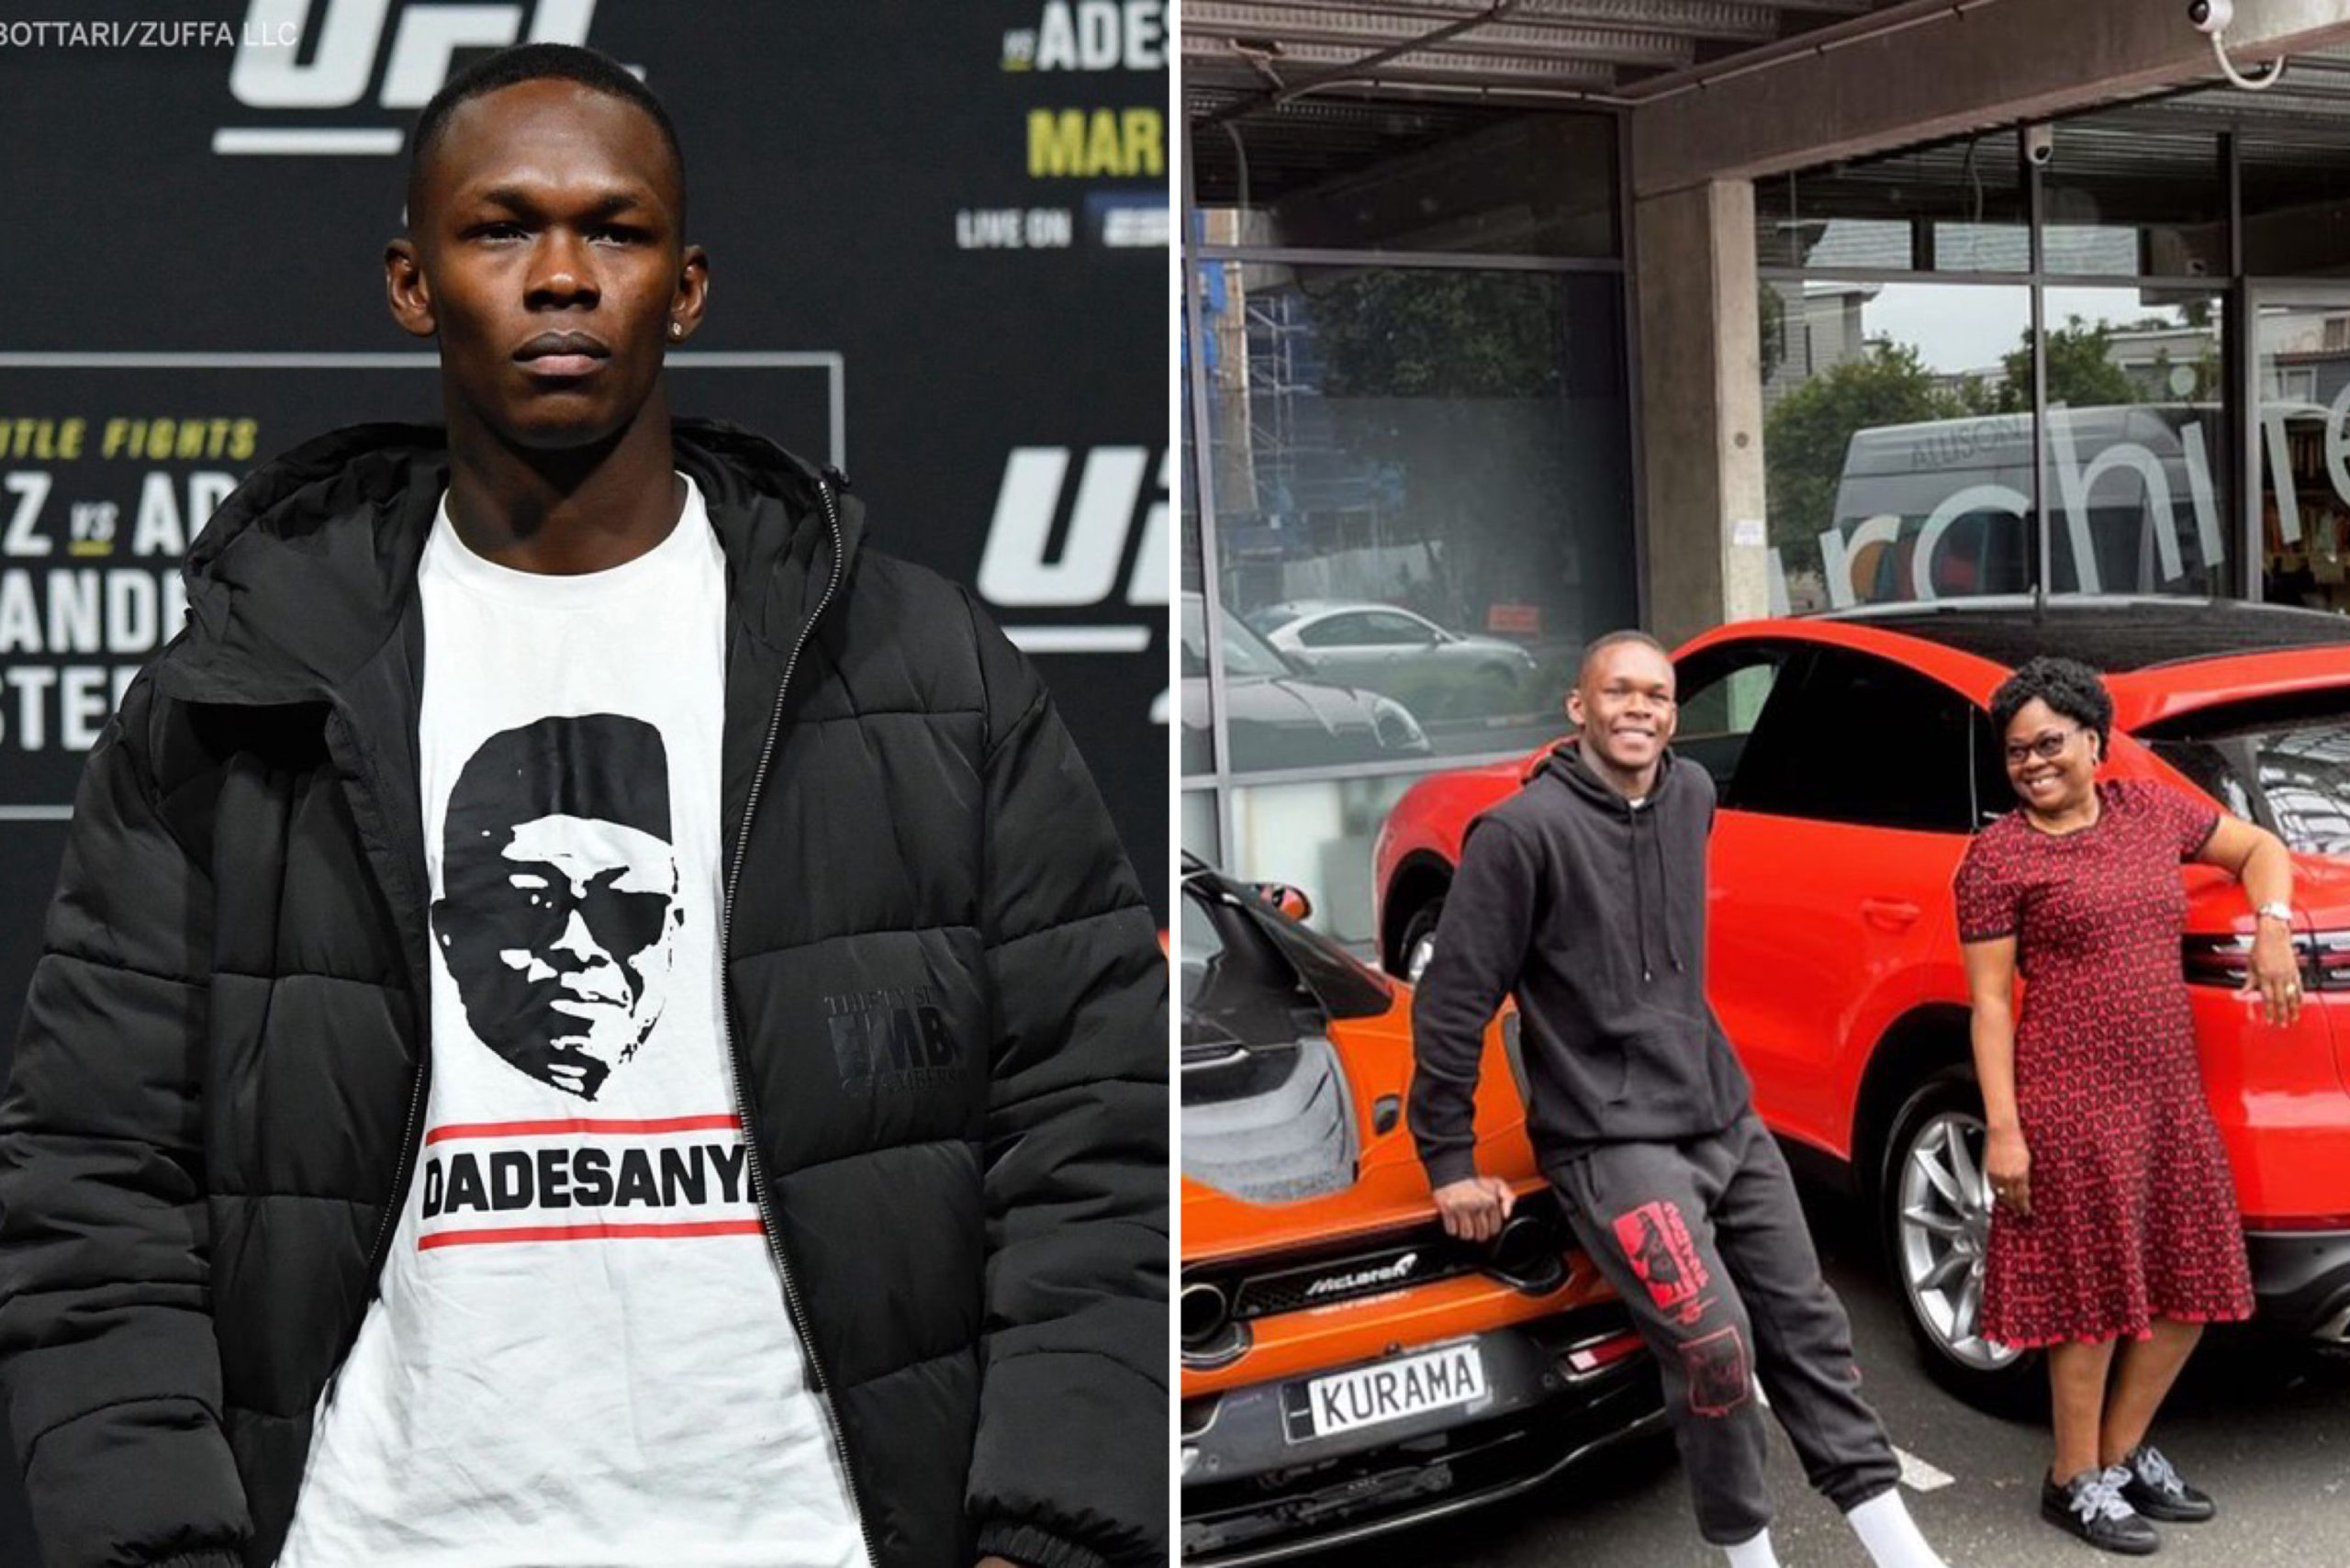 Nigerian-Born Mixed Martial Artist, Israel Adesanya Honours Father By Wearing Shirt With Photo Of Him, Buys Mother A Porsche